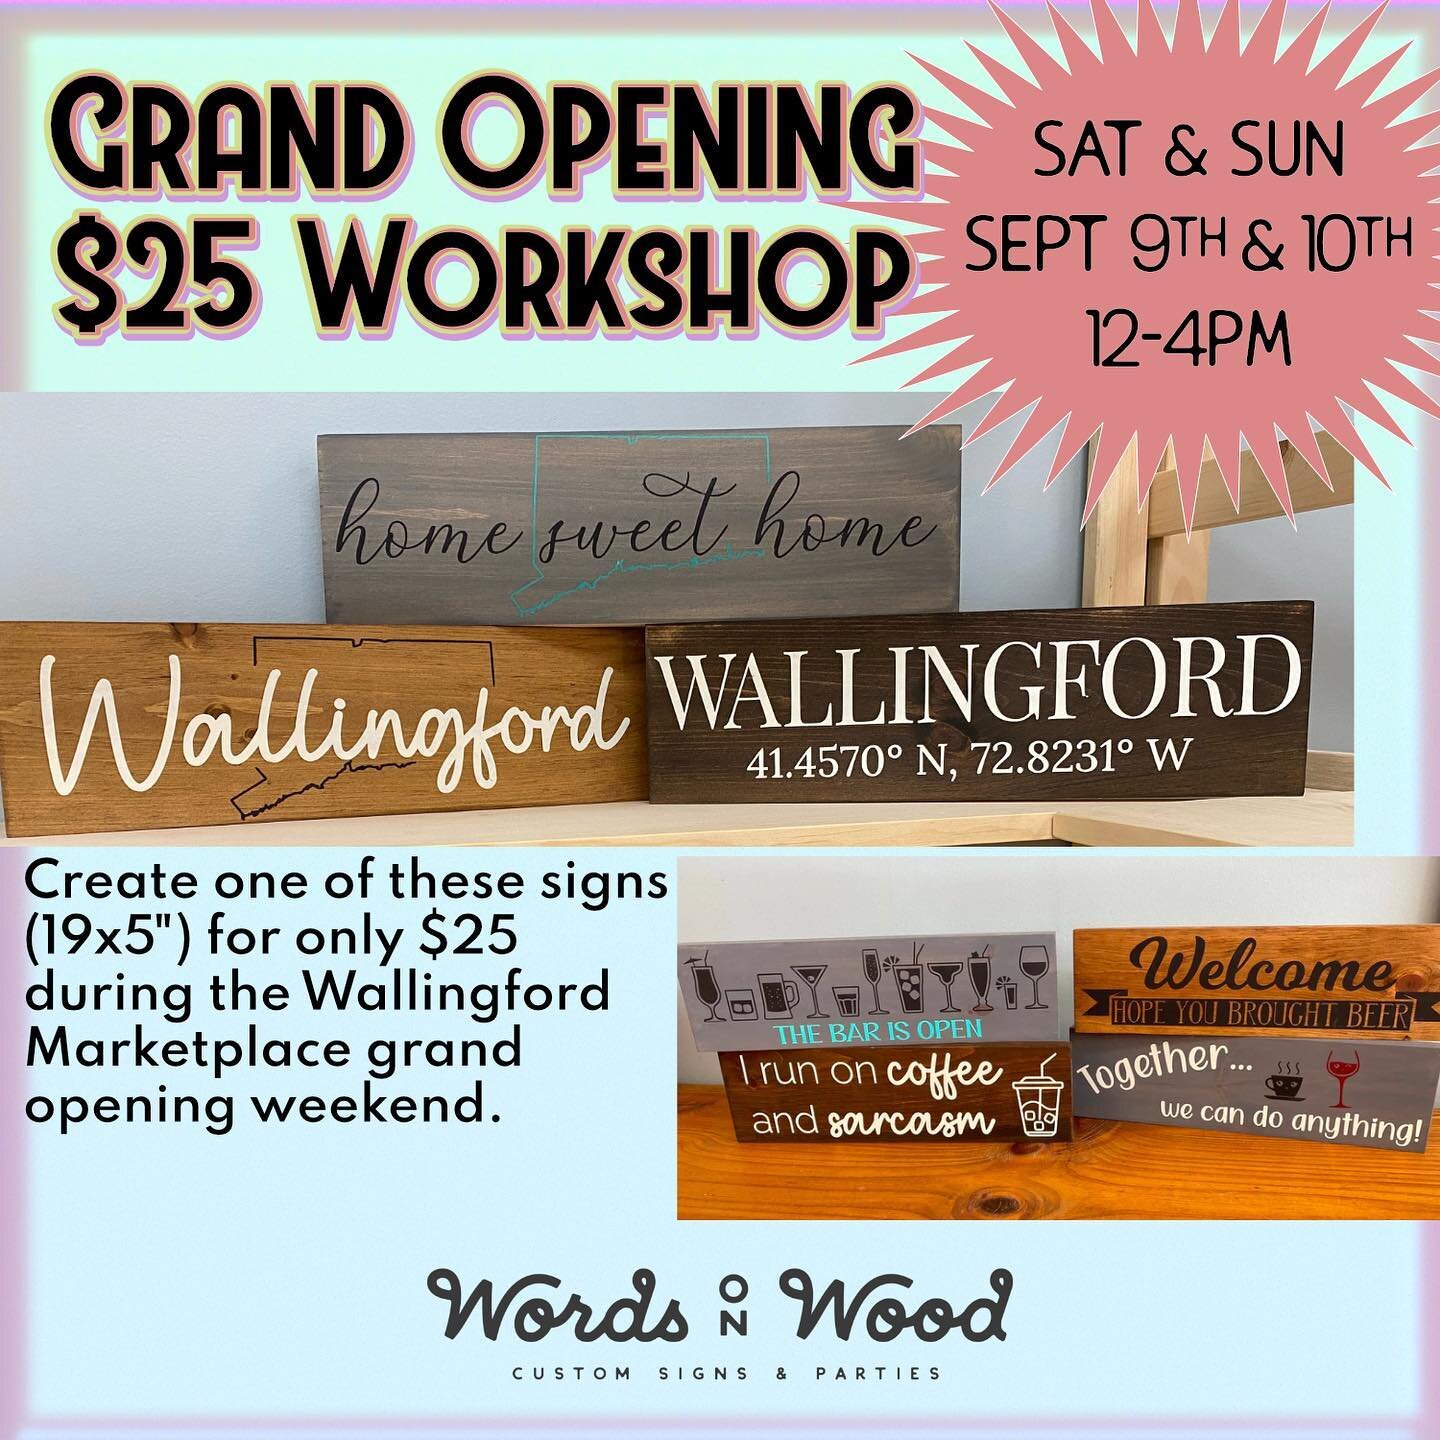 We are celebrating the Wallingford Marketplace&rsquo;s grand opening this weekend with special drop in workshops this Saturday &amp; Sunday 12-4 where you can make any of these fun signs for $25. When you arrive, you&rsquo;ll choose one of these desi